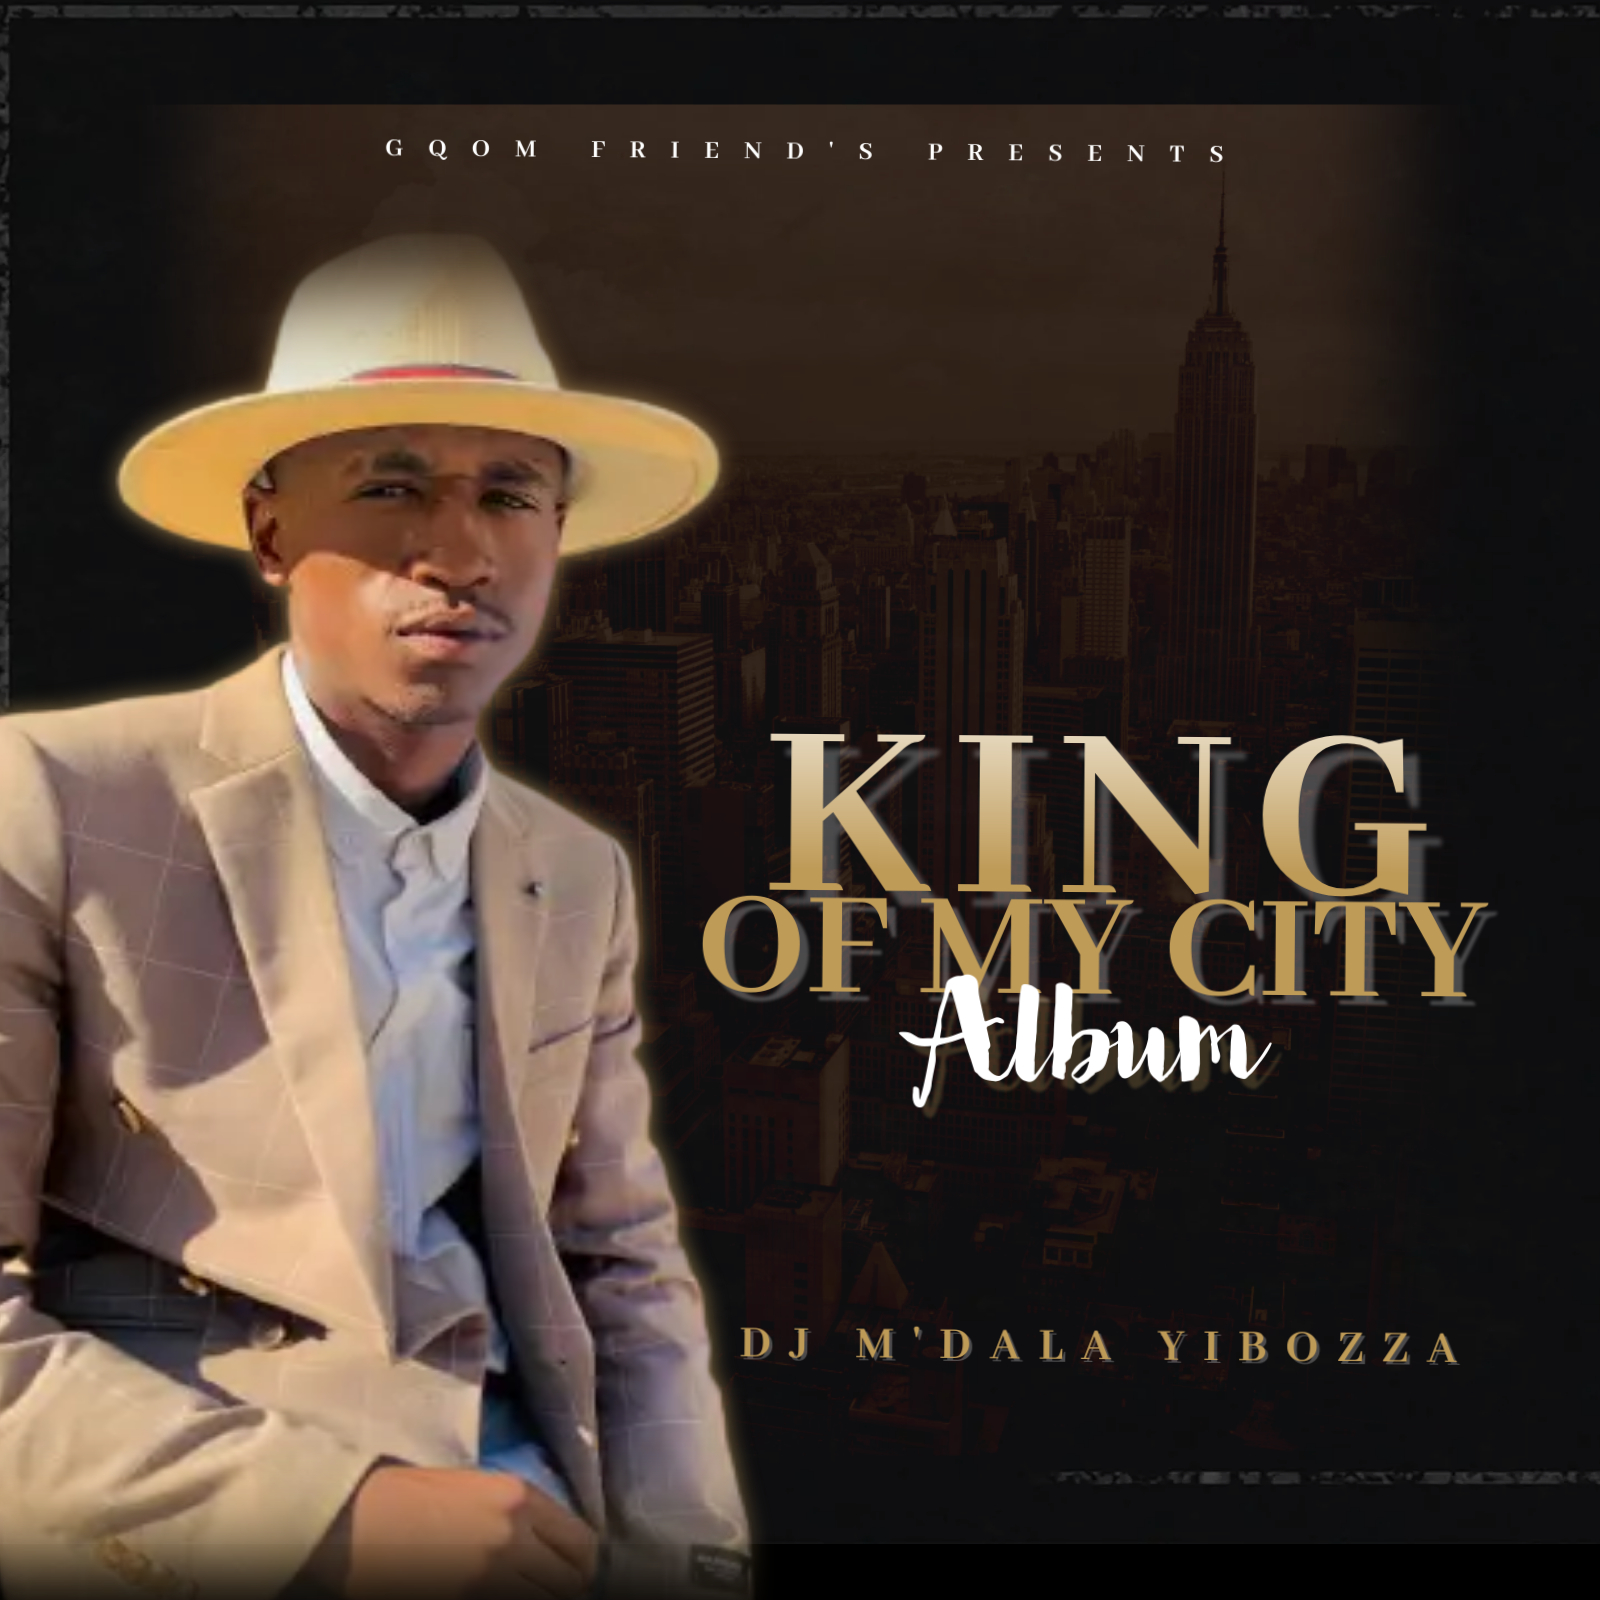 King Of My City Mixtape CD Cover Template - Made with PosterMyWall.jpg